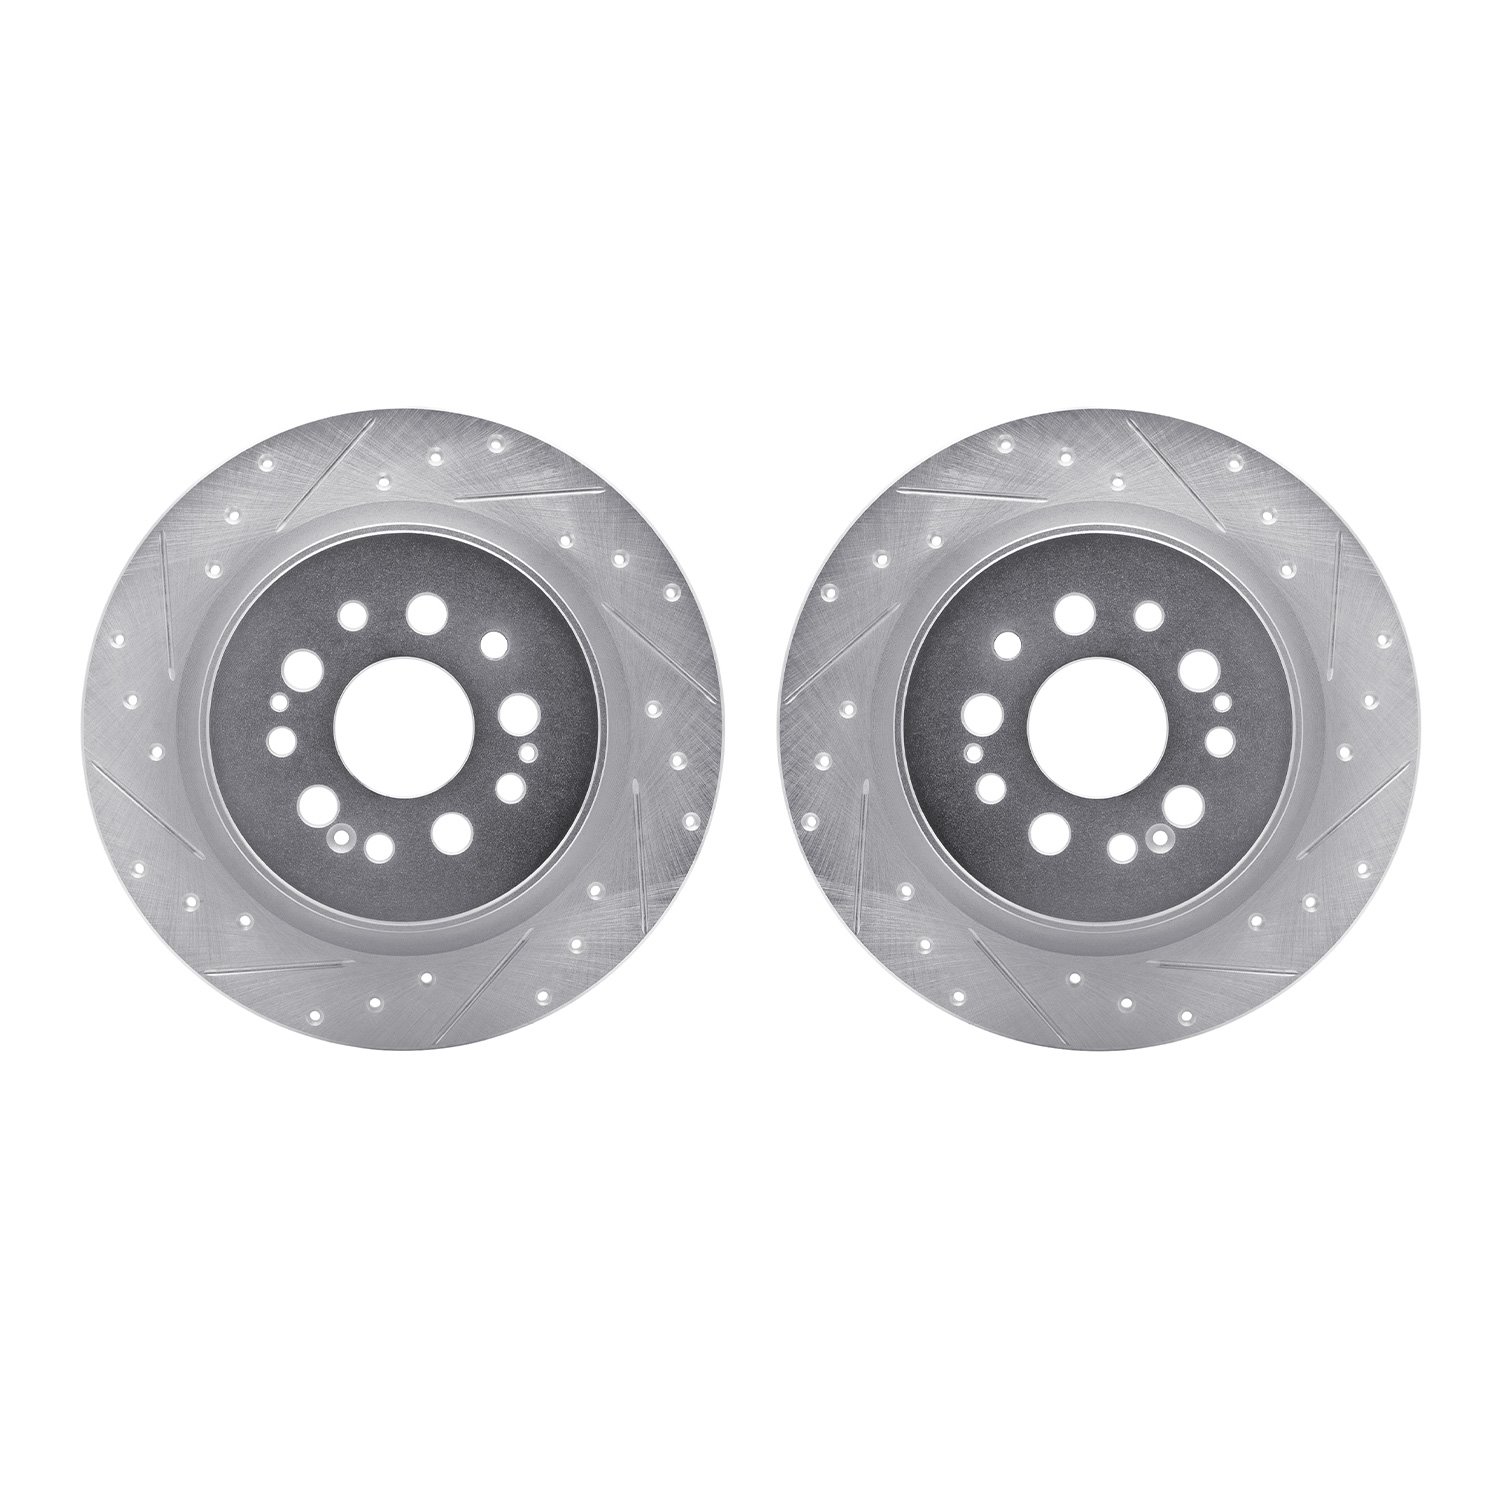 7002-59054 Drilled/Slotted Brake Rotors [Silver], Fits Select Acura/Honda, Position: Rear